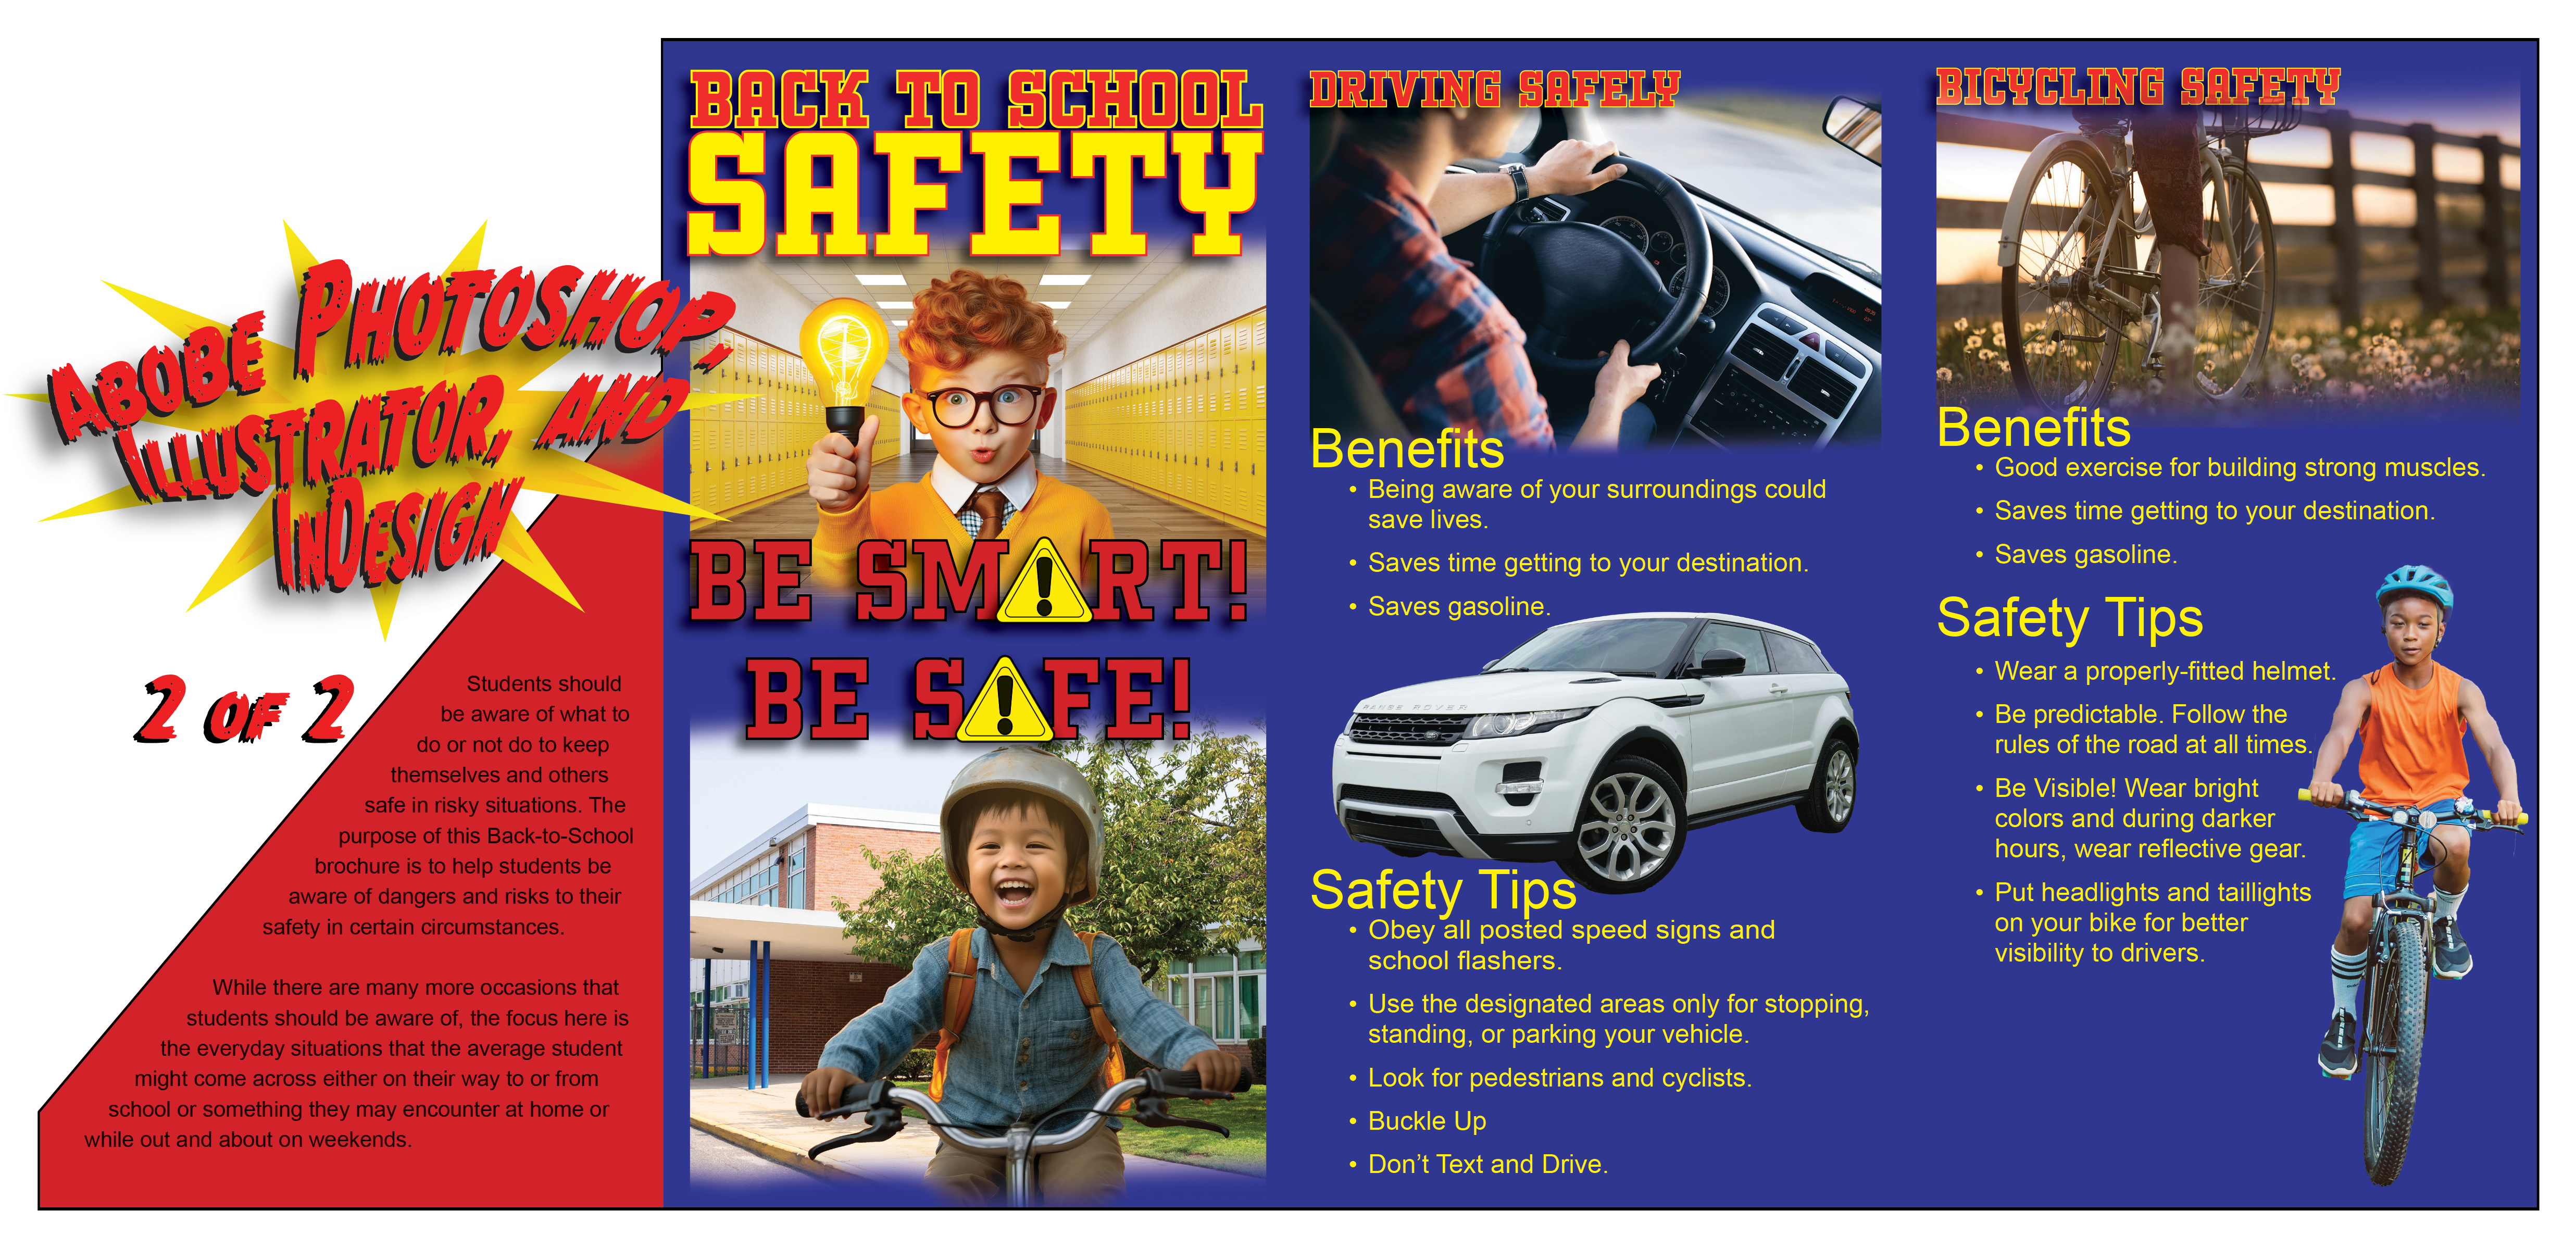 Brochure for Back to School Safety. Part 2 of 2. Created with Adobe Photoshop, Illustrator, and InDesign.